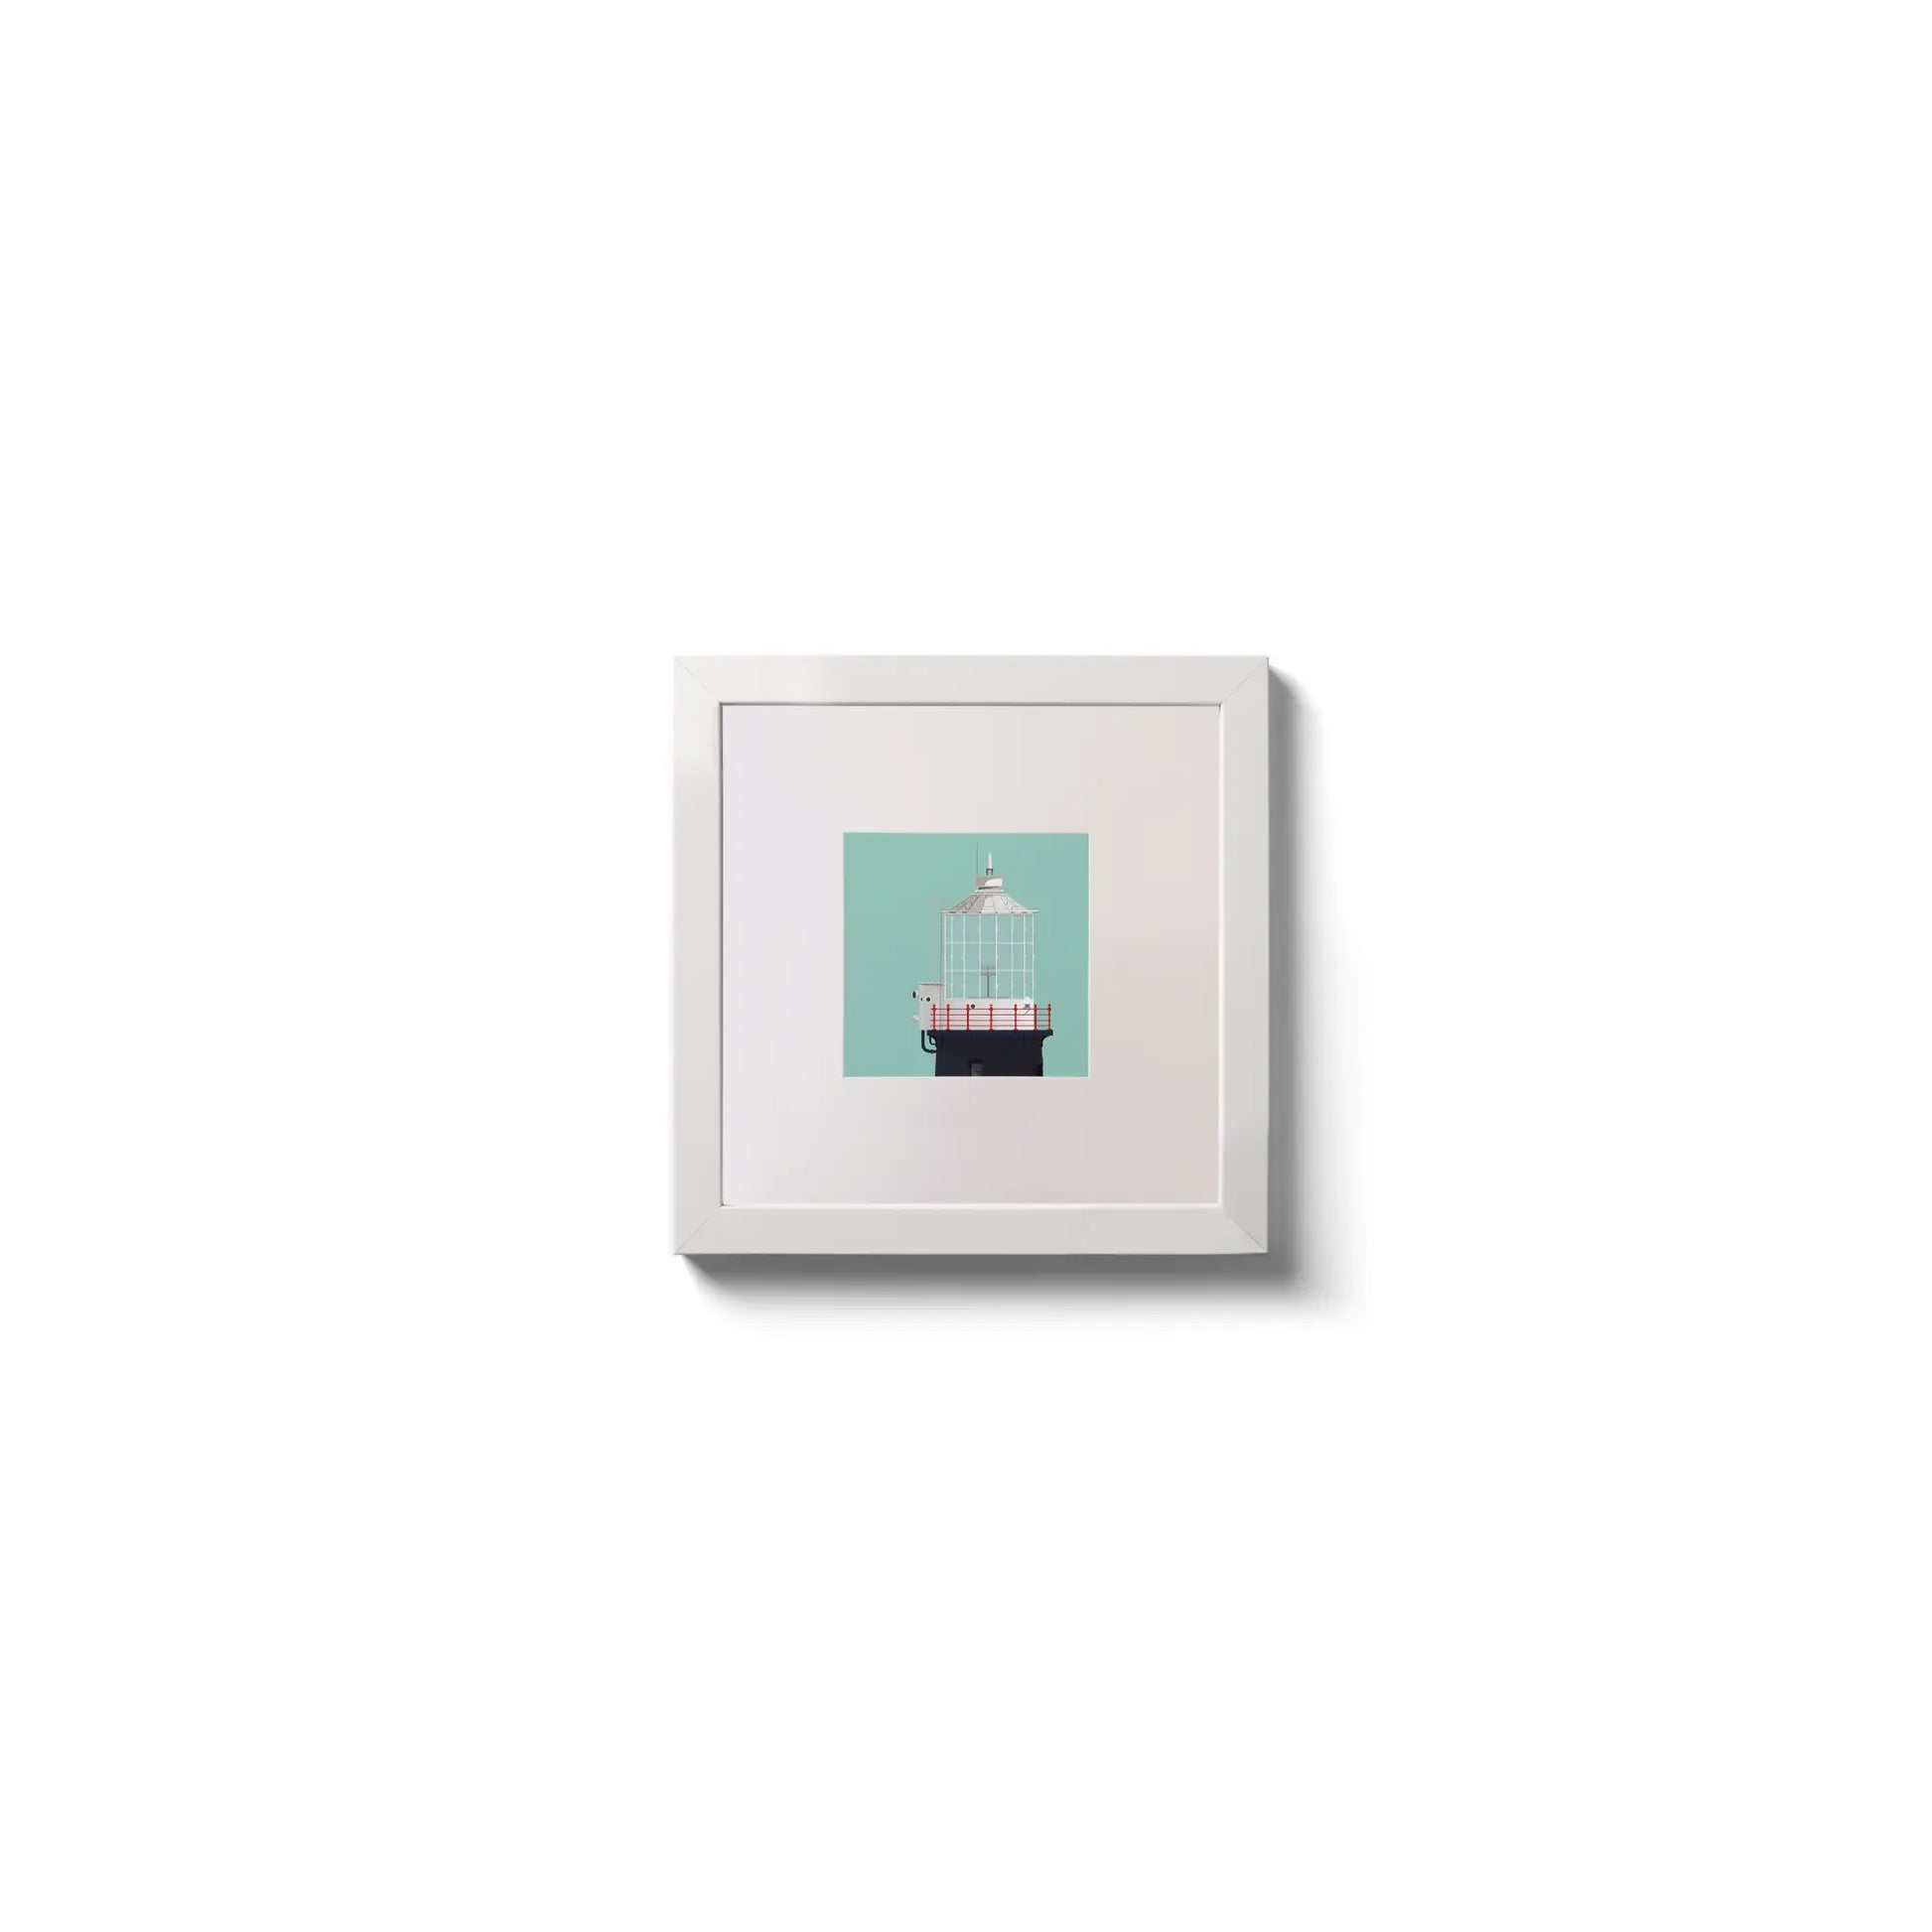 Illustration Mew Island lighthouse on an ocean green background,  in a white square frame measuring 10x10cm.